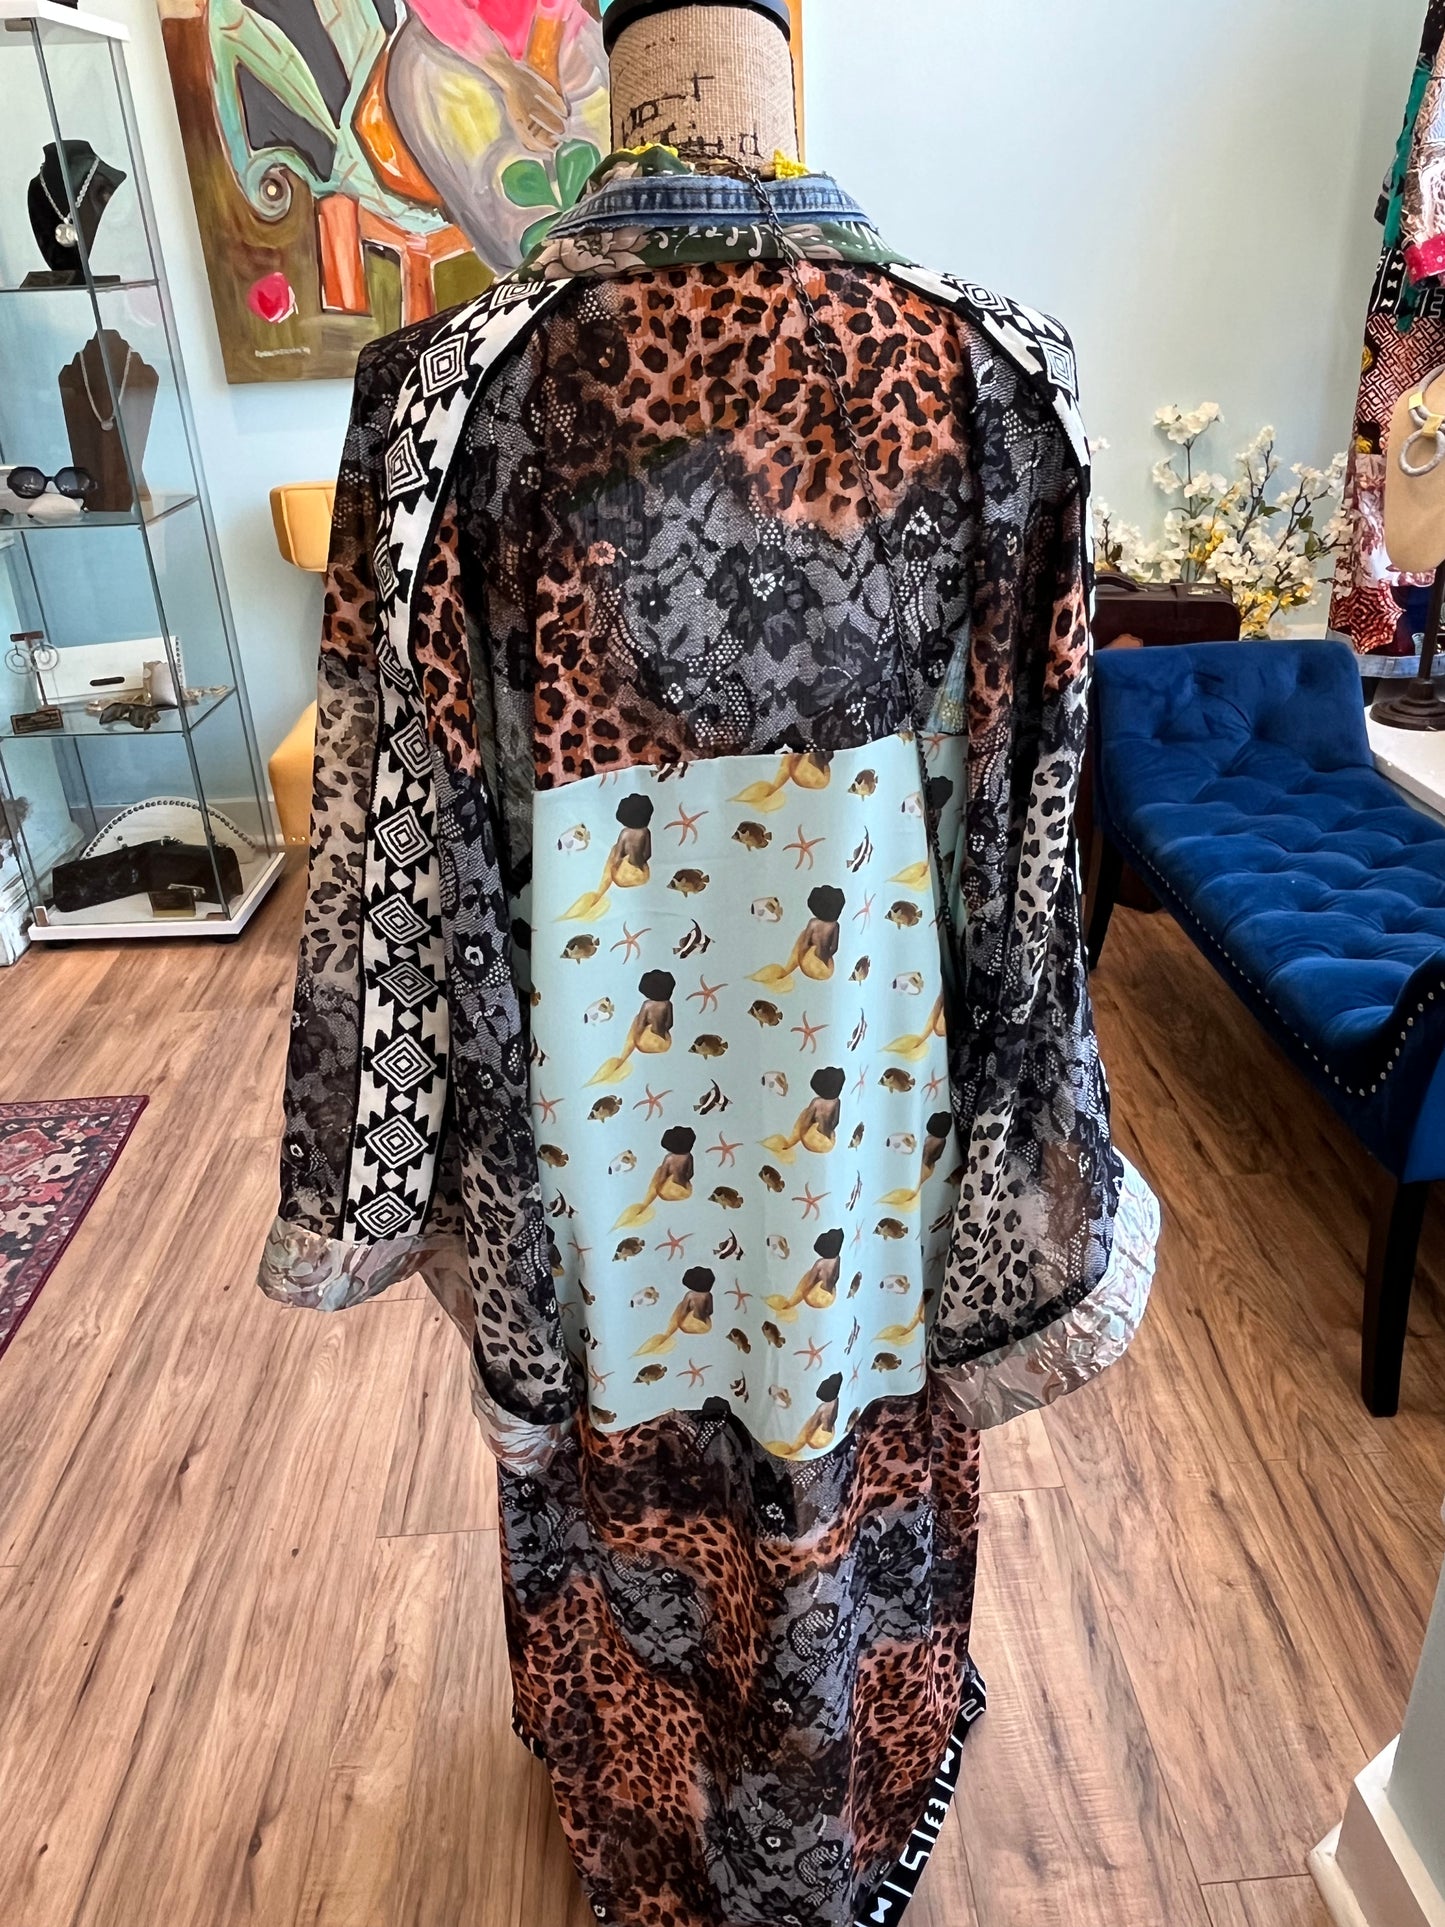 Afro Mermaid Kimono - Handcrafted One of a Kind